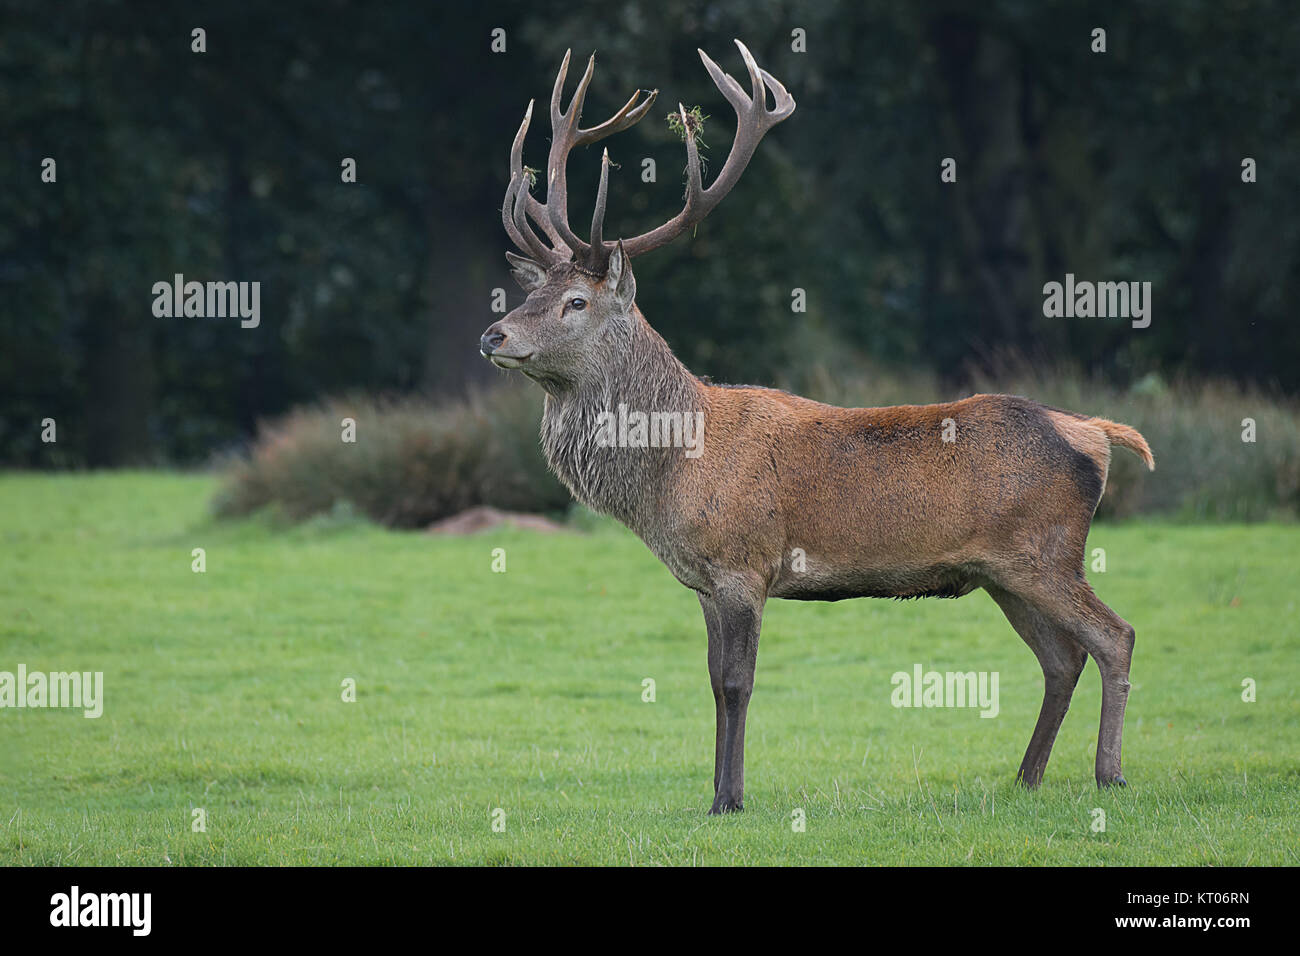 A full length side portrait of a red deer stag standing proudly and majestic Stock Photo